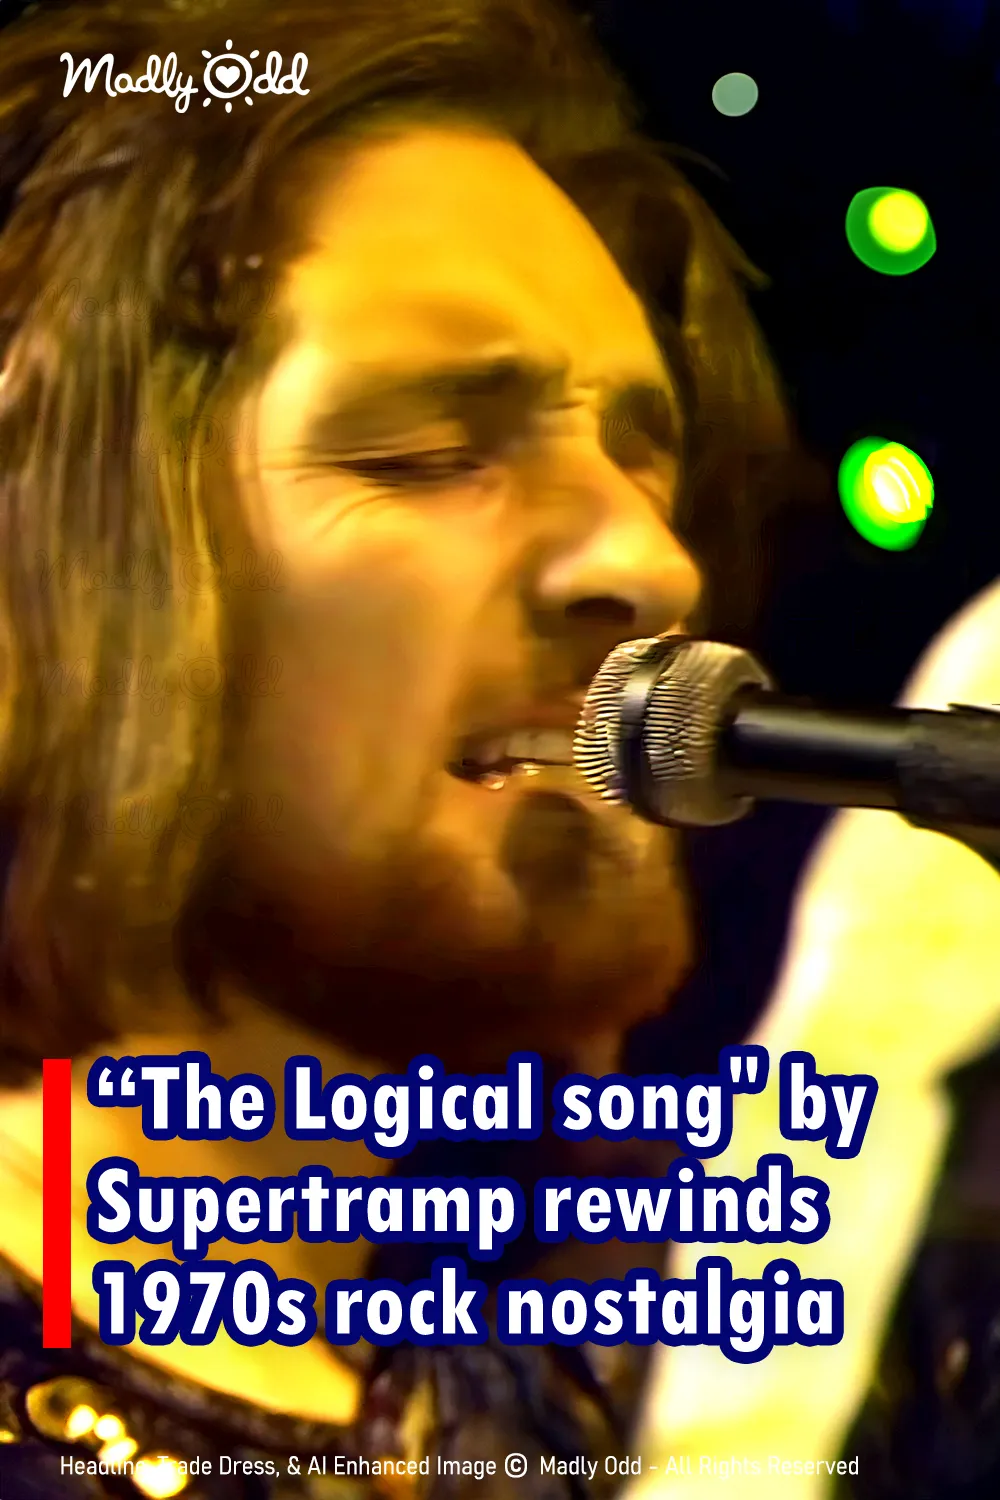 Drop the needle on \'The Logical Song\' by Supertramp for that 70s rock feel